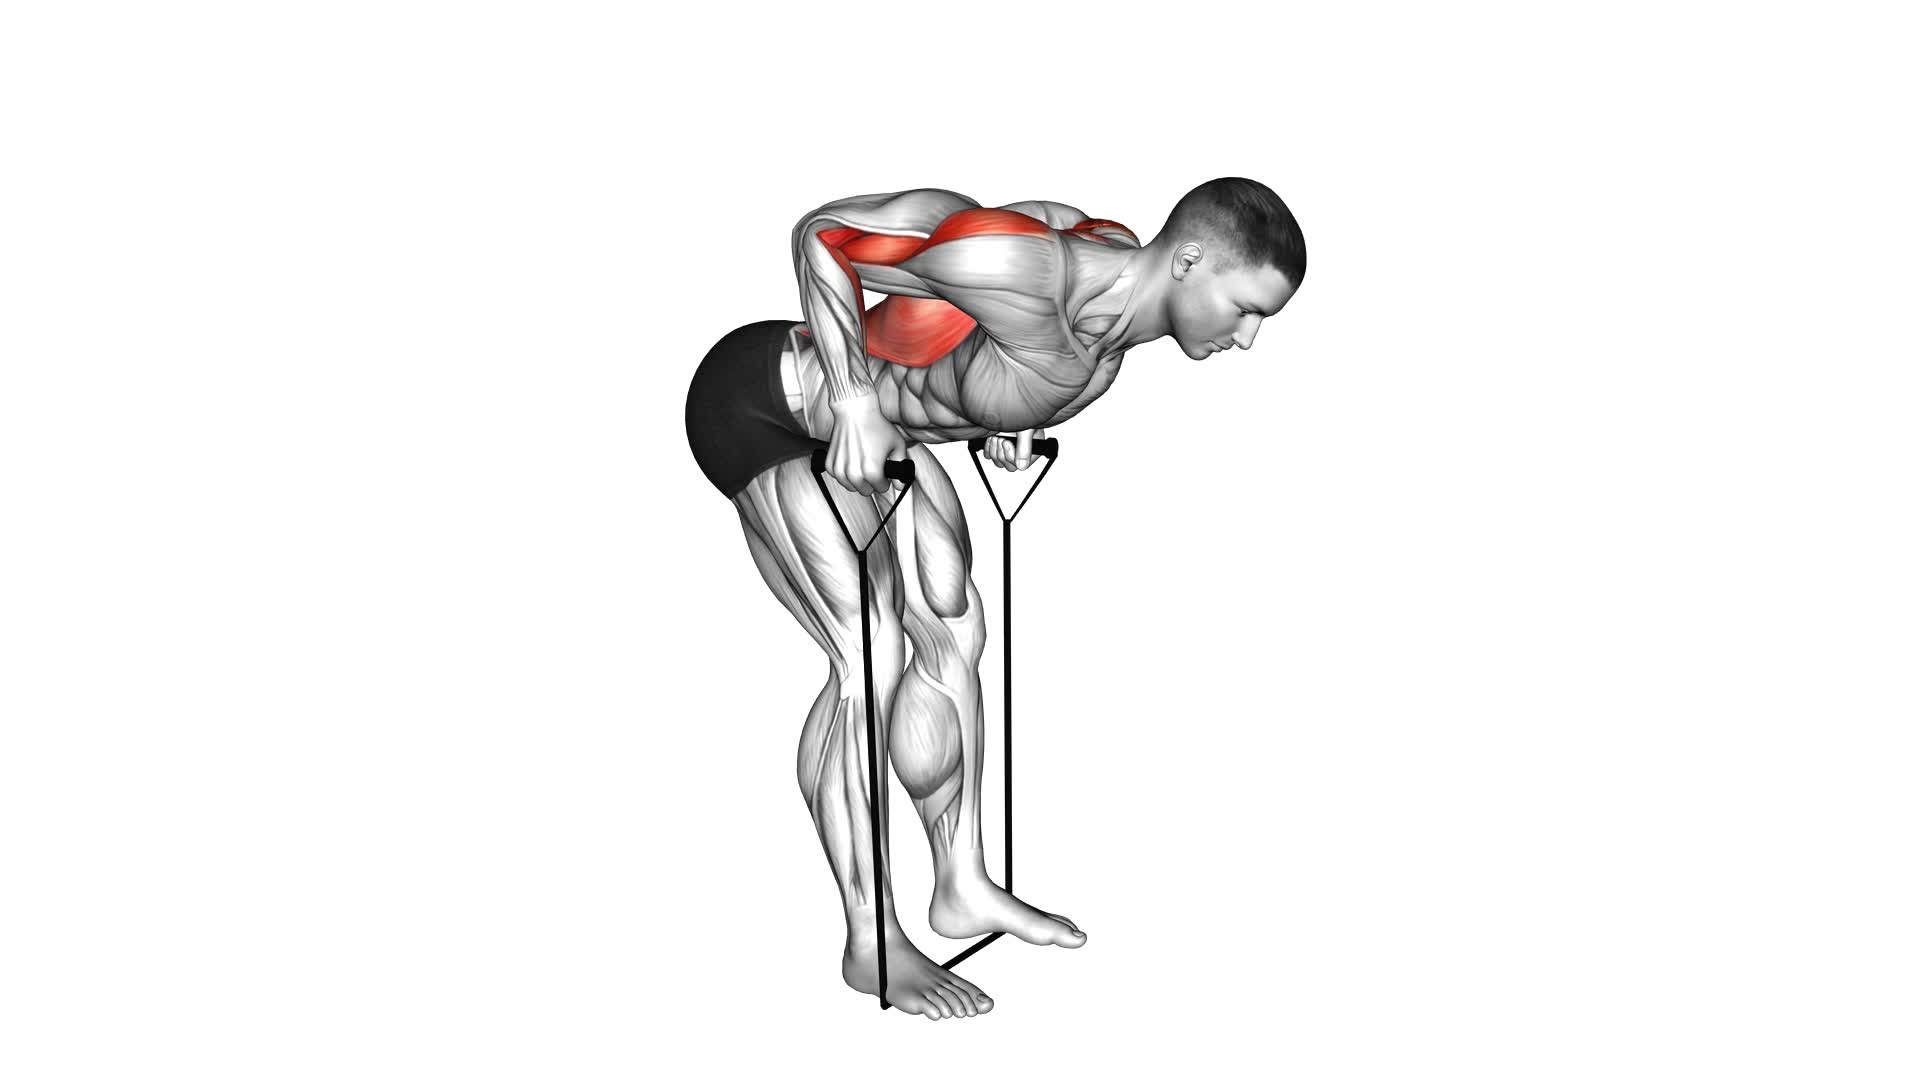 Band Bent-Over Row (Male) - Video Exercise Guide & Tips